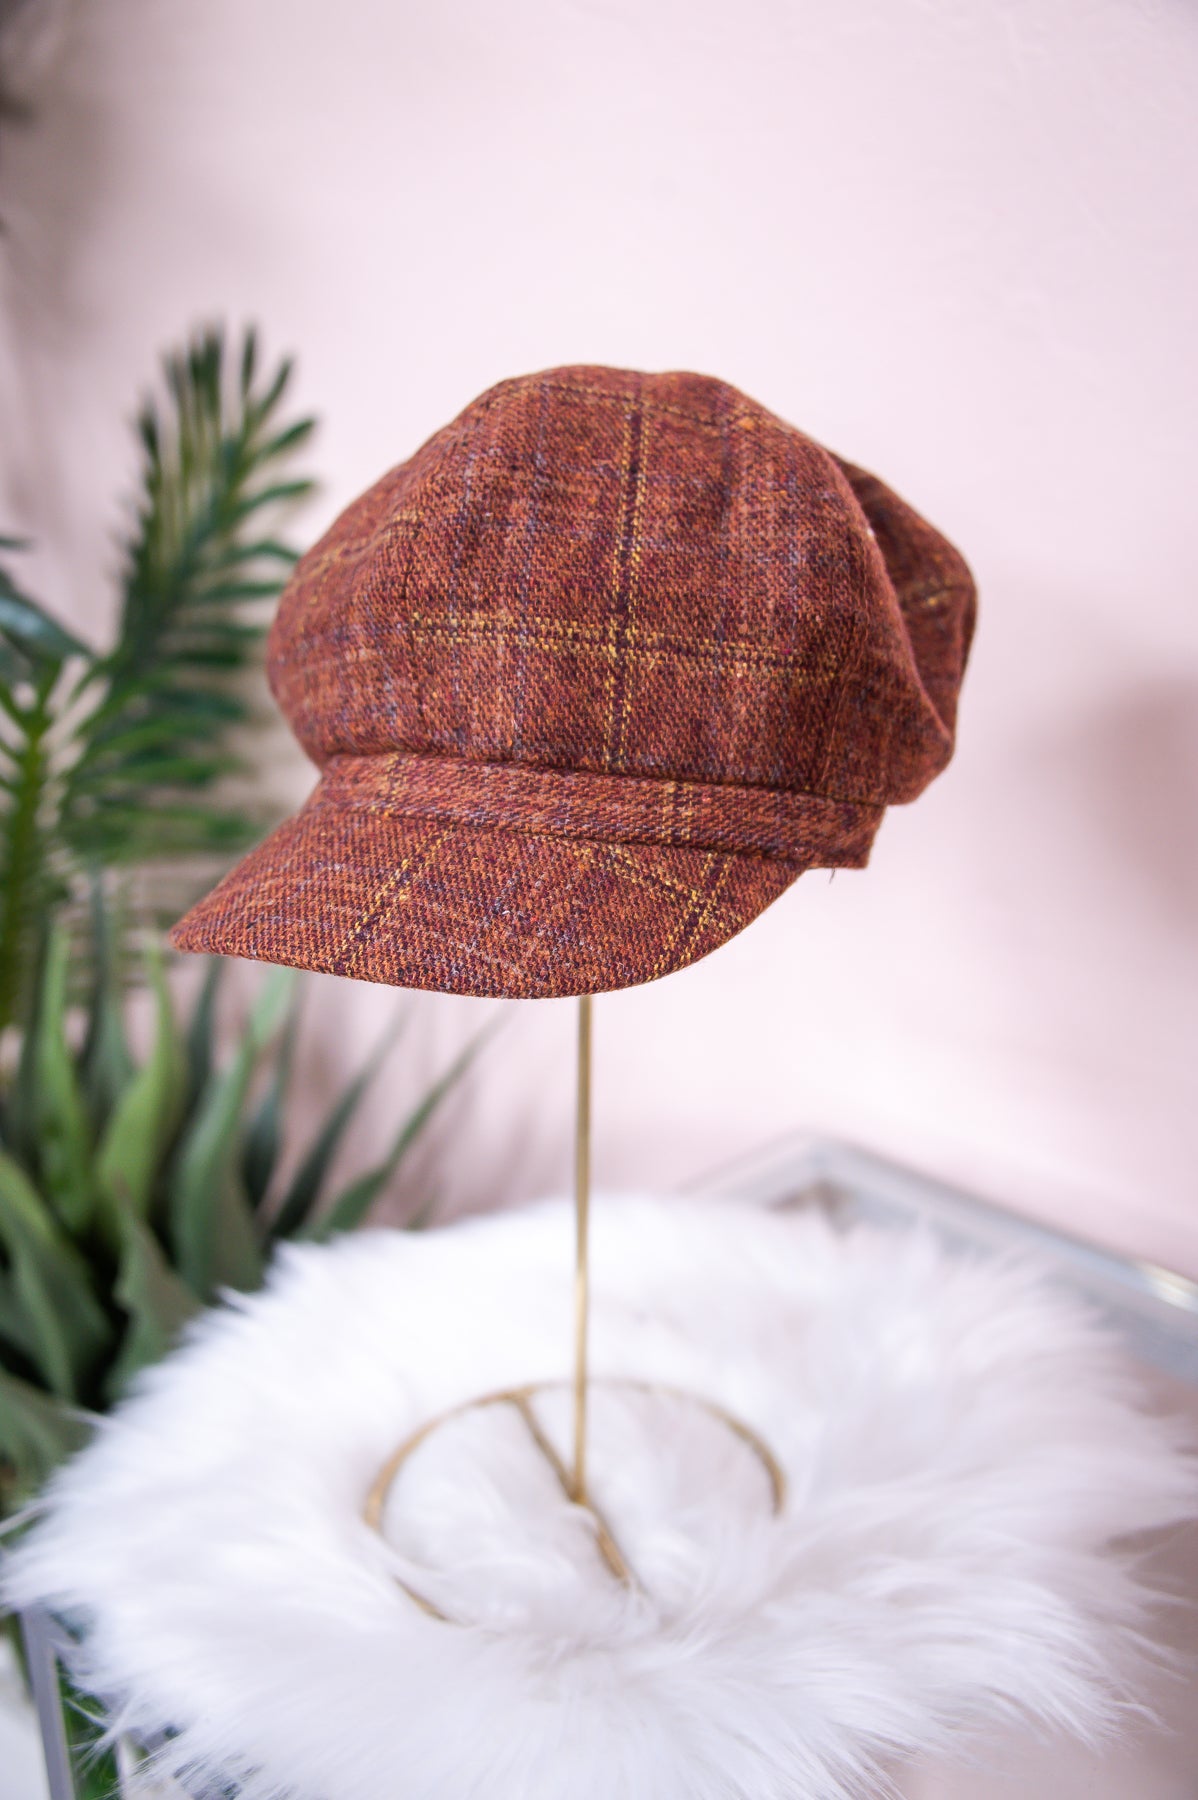 NEW Pendleton Graphic Red Plaid Newsboy Hat Cap Cabbie Wool Size Small